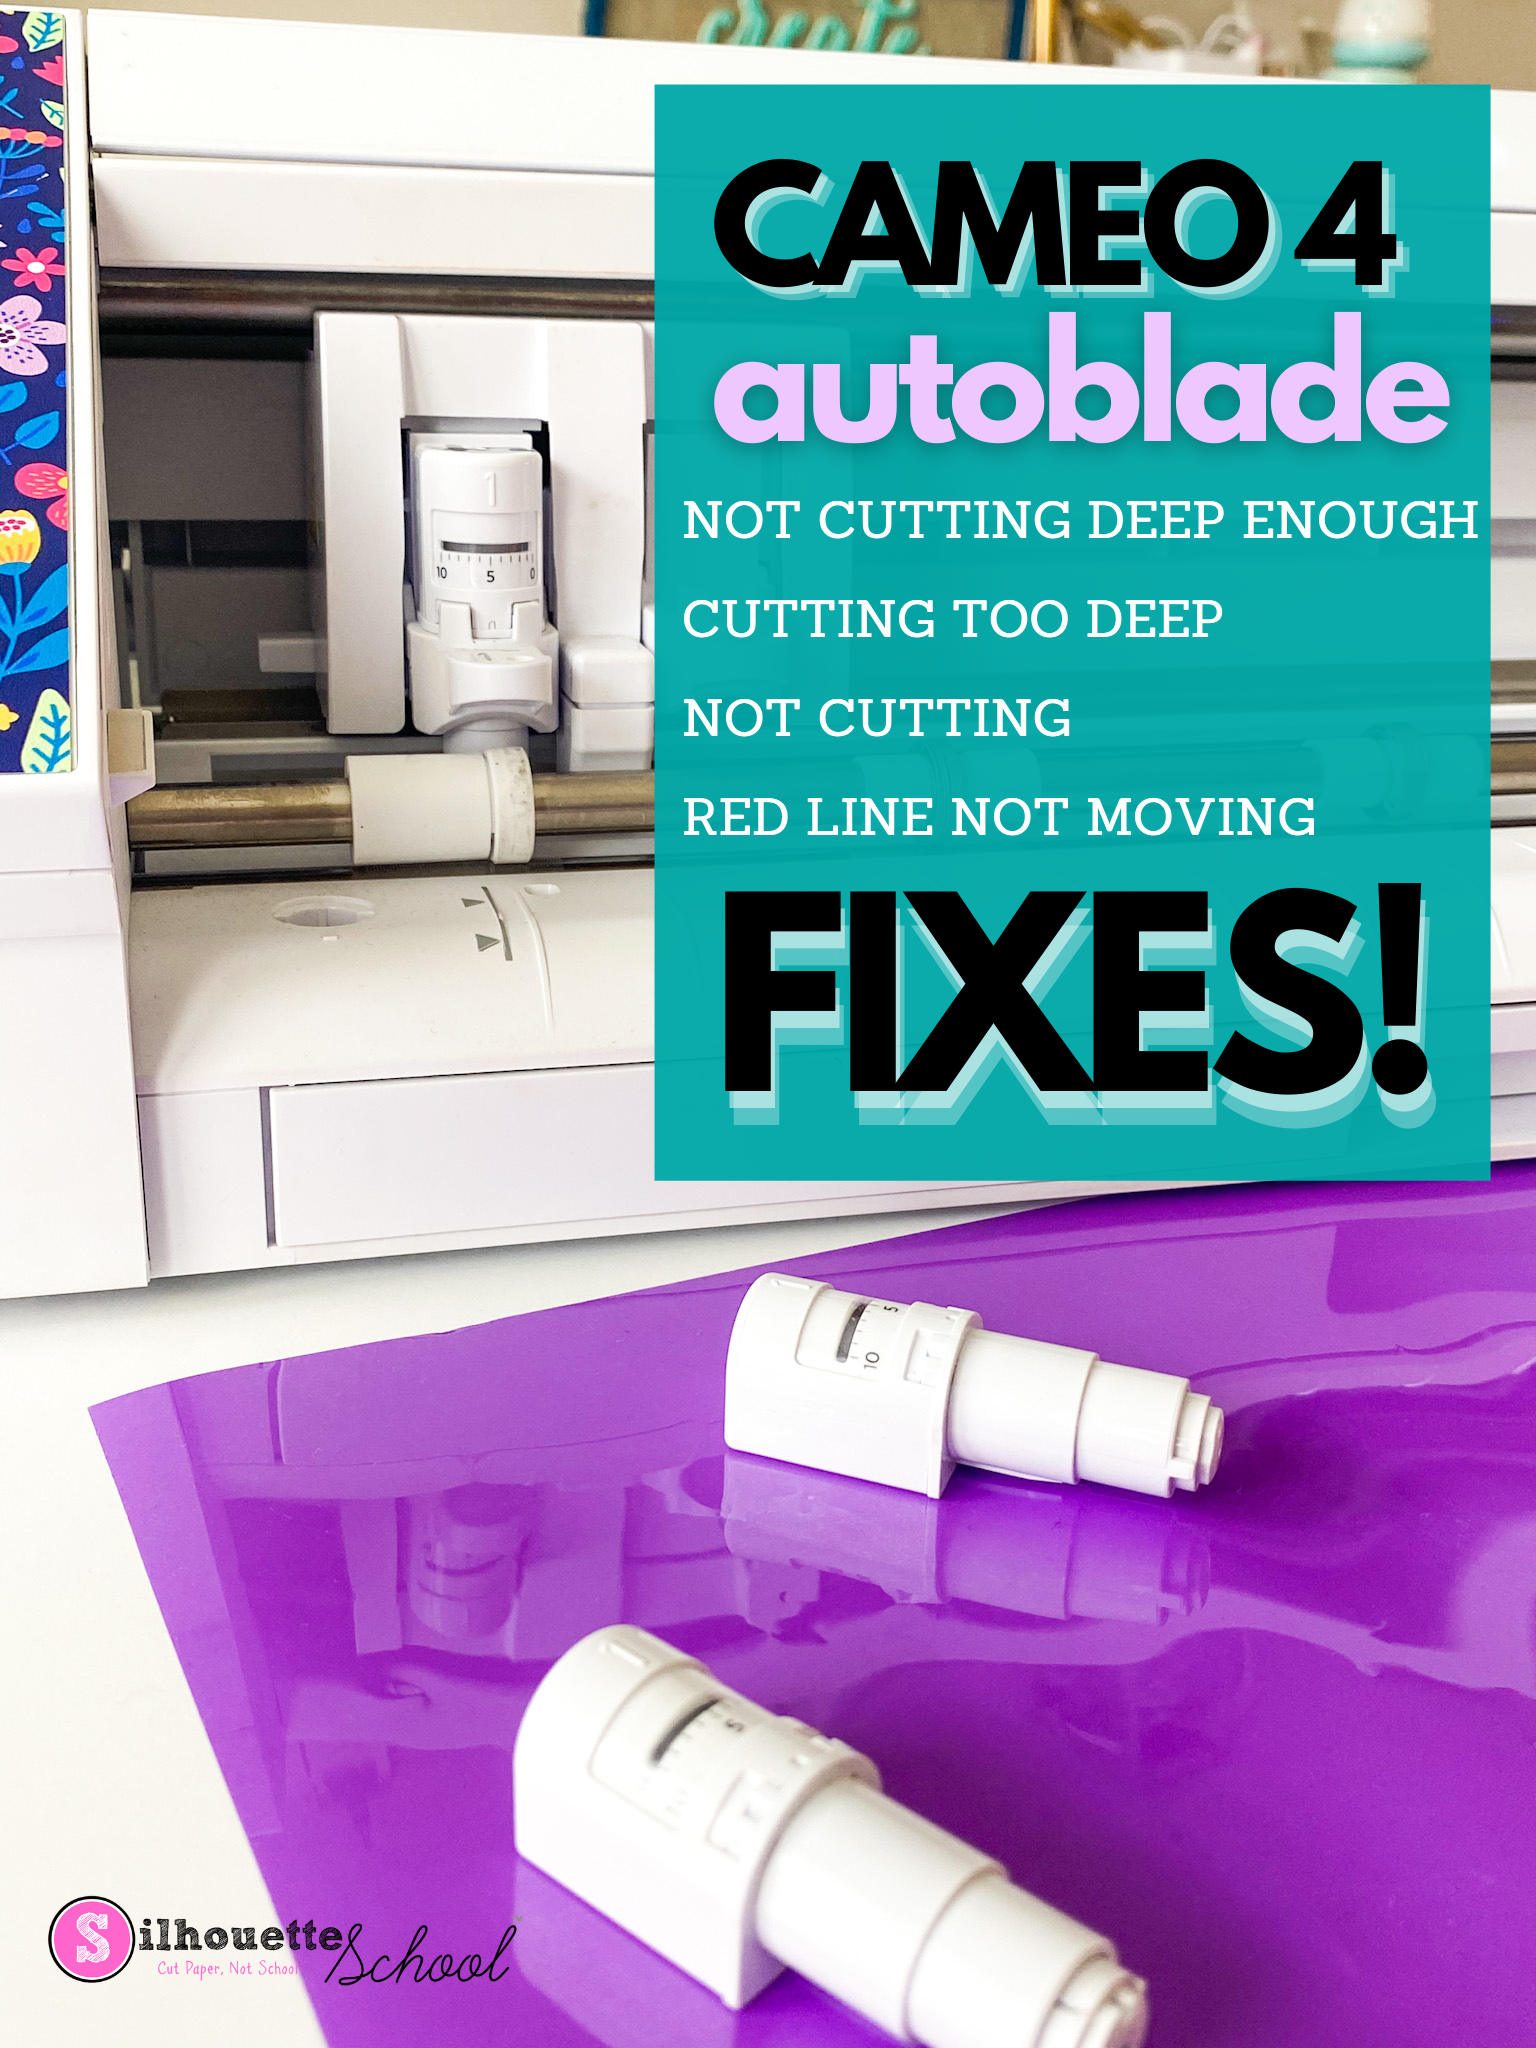 Silhouette CAMEO 4 Autoblade Not Cutting? 4 Fixes - Silhouette School